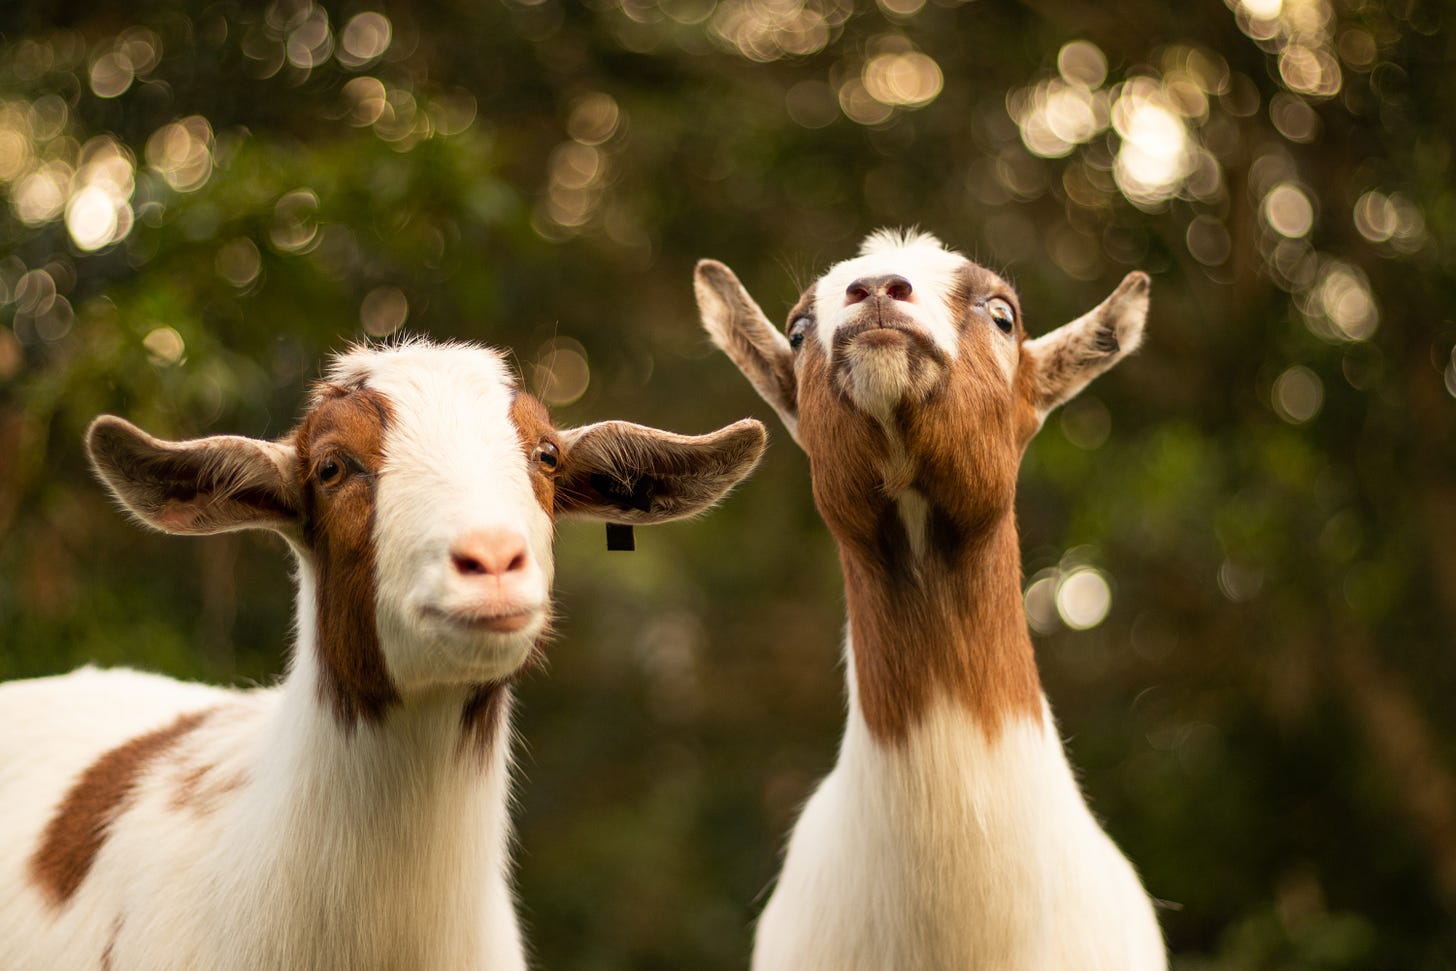 two brown and white goats, one looking derpy and the other looking like an old man who just heard a fart in church